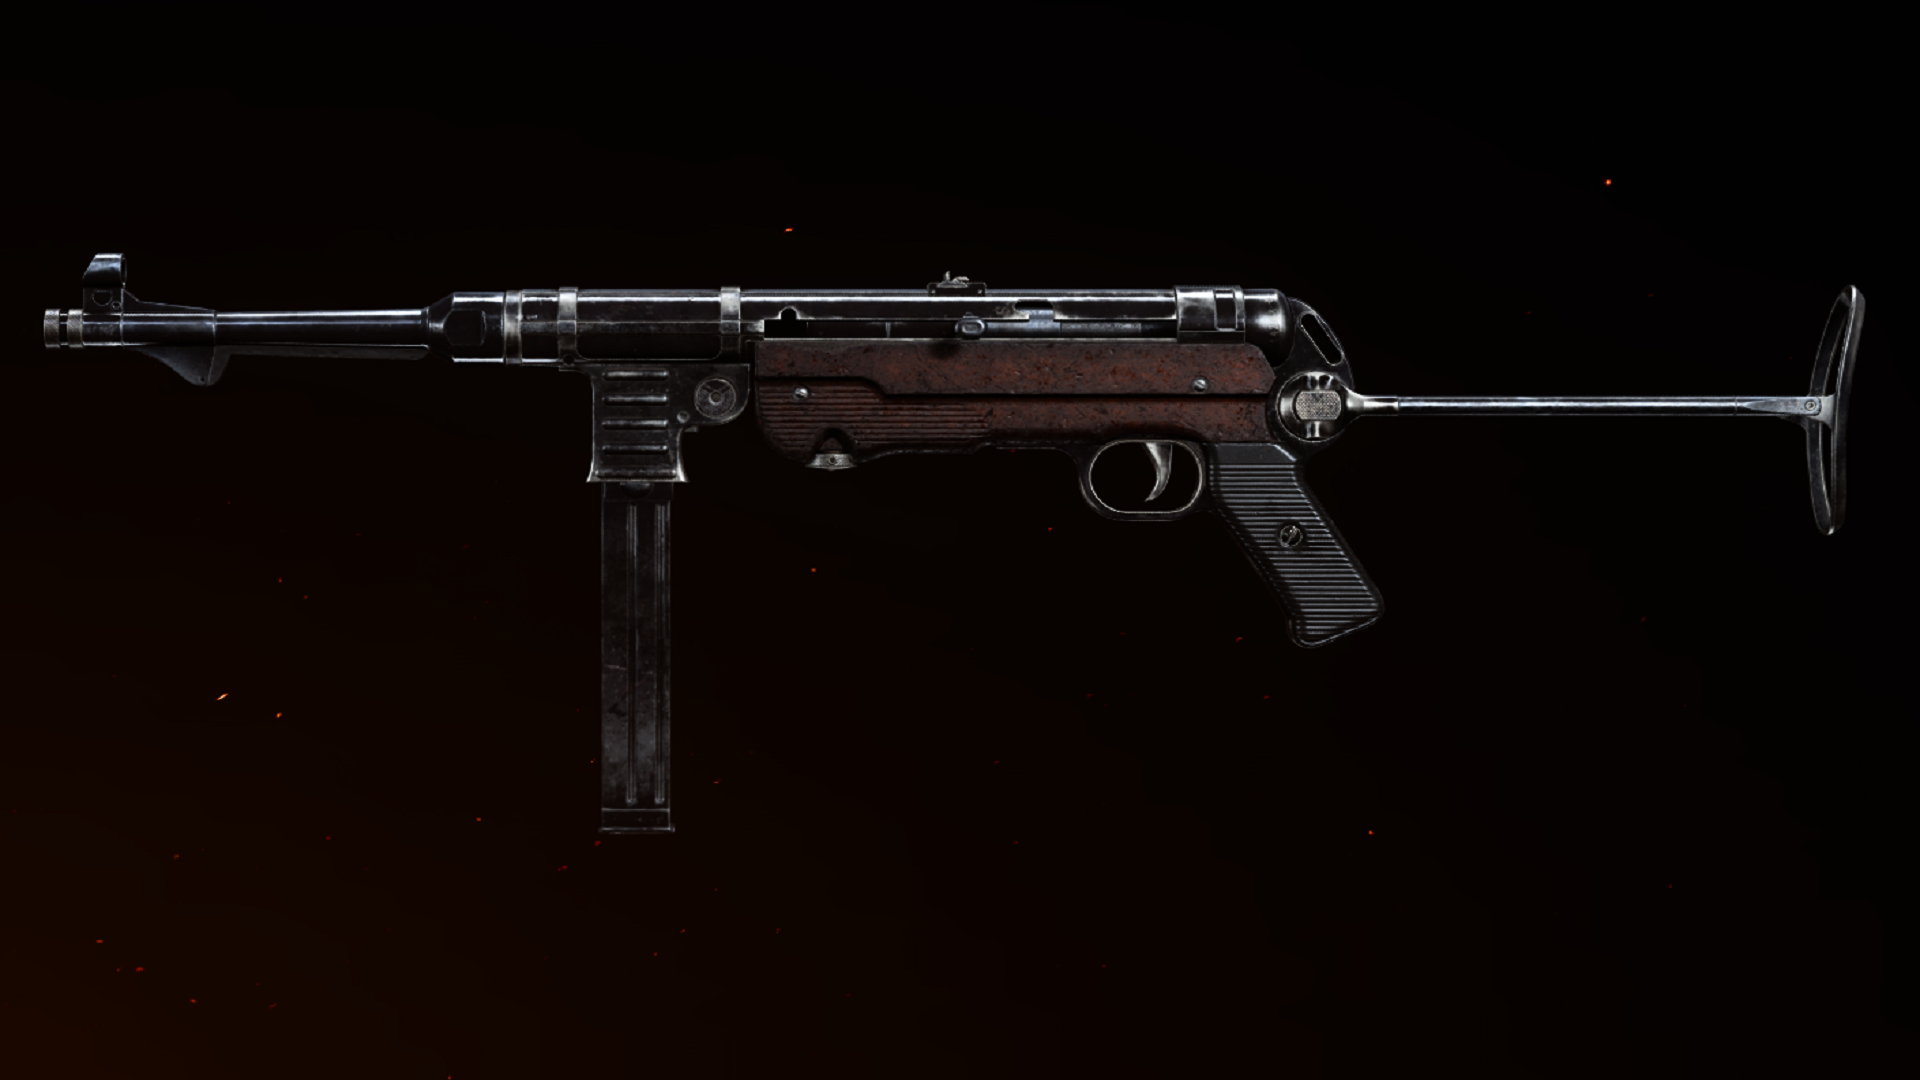 The MP40 in Warzone